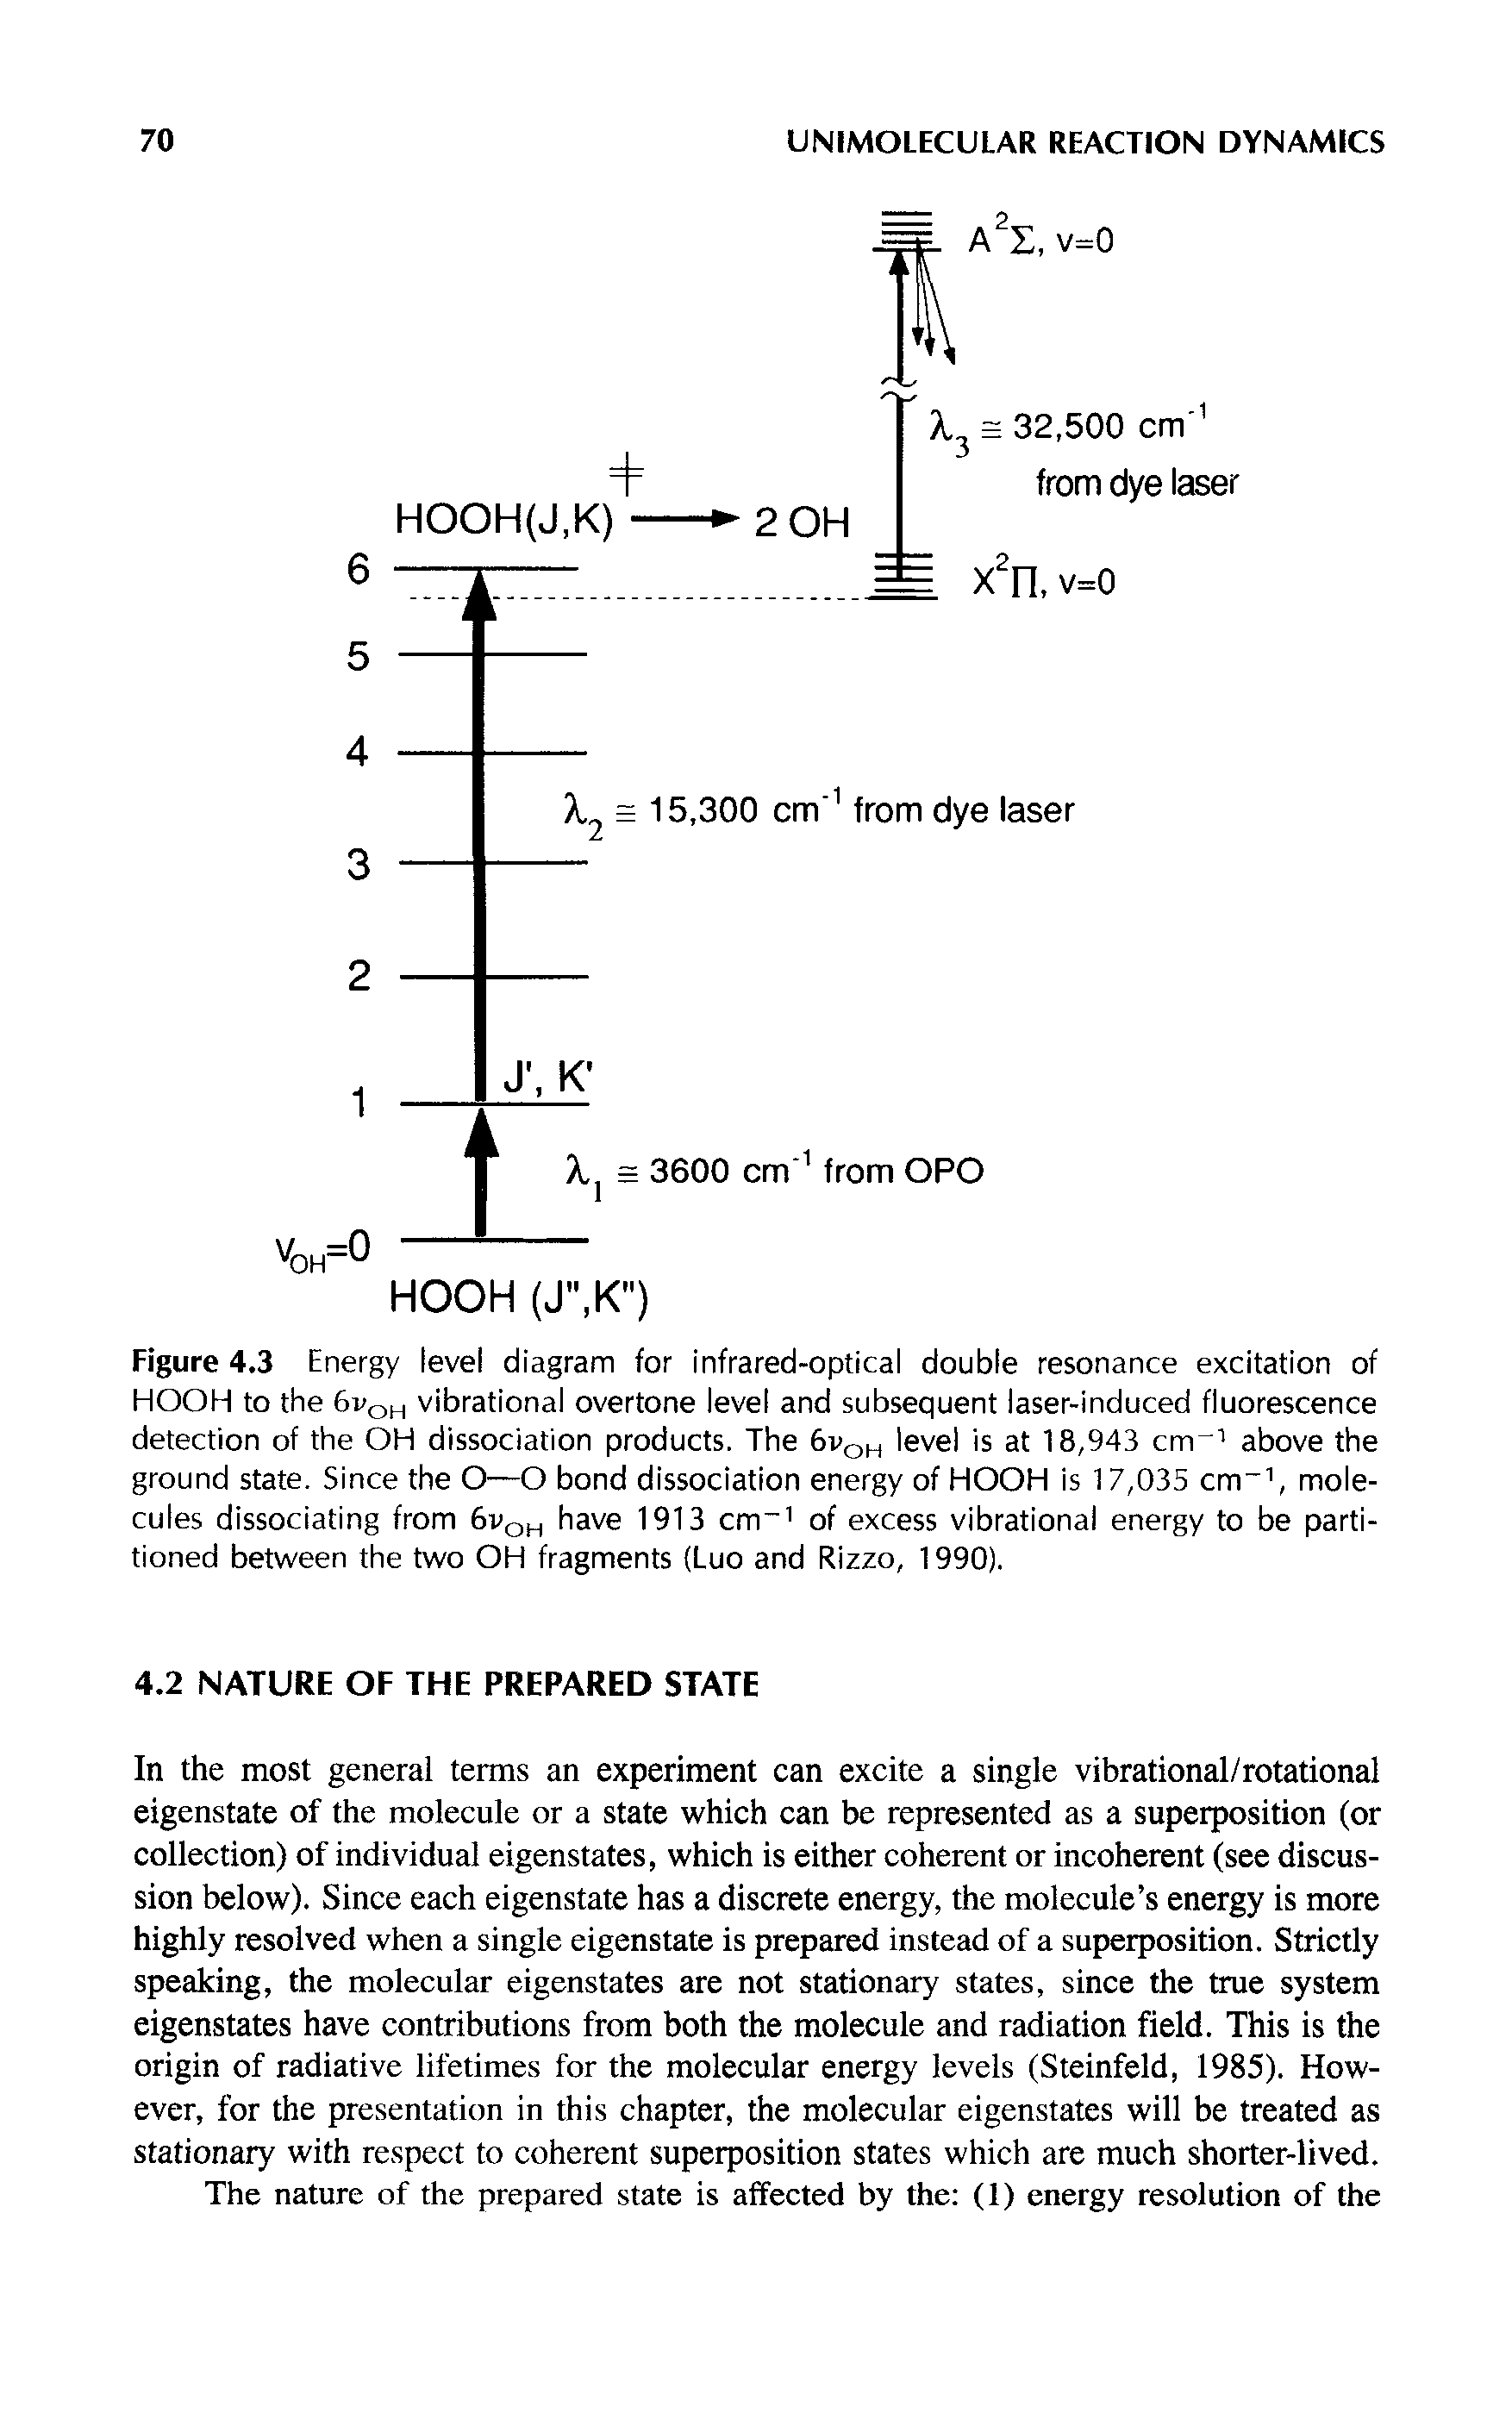 Figure 4.3 Energy level diagram for infrared-optical double resonance excitation of HOOH to the 6pqh vibrational overtone level and subsequent laser-induced fluorescence detection of the OH dissociation products. The 6vqh level is at 18,943 cm above the ground state. Since the O—O bond dissociation energy of HOOH is 17,035 cm molecules dissociating from 6vqh have 1913 cm of excess vibrational energy to be partitioned between the two OH fragments Luo and Rizzo, 1990).